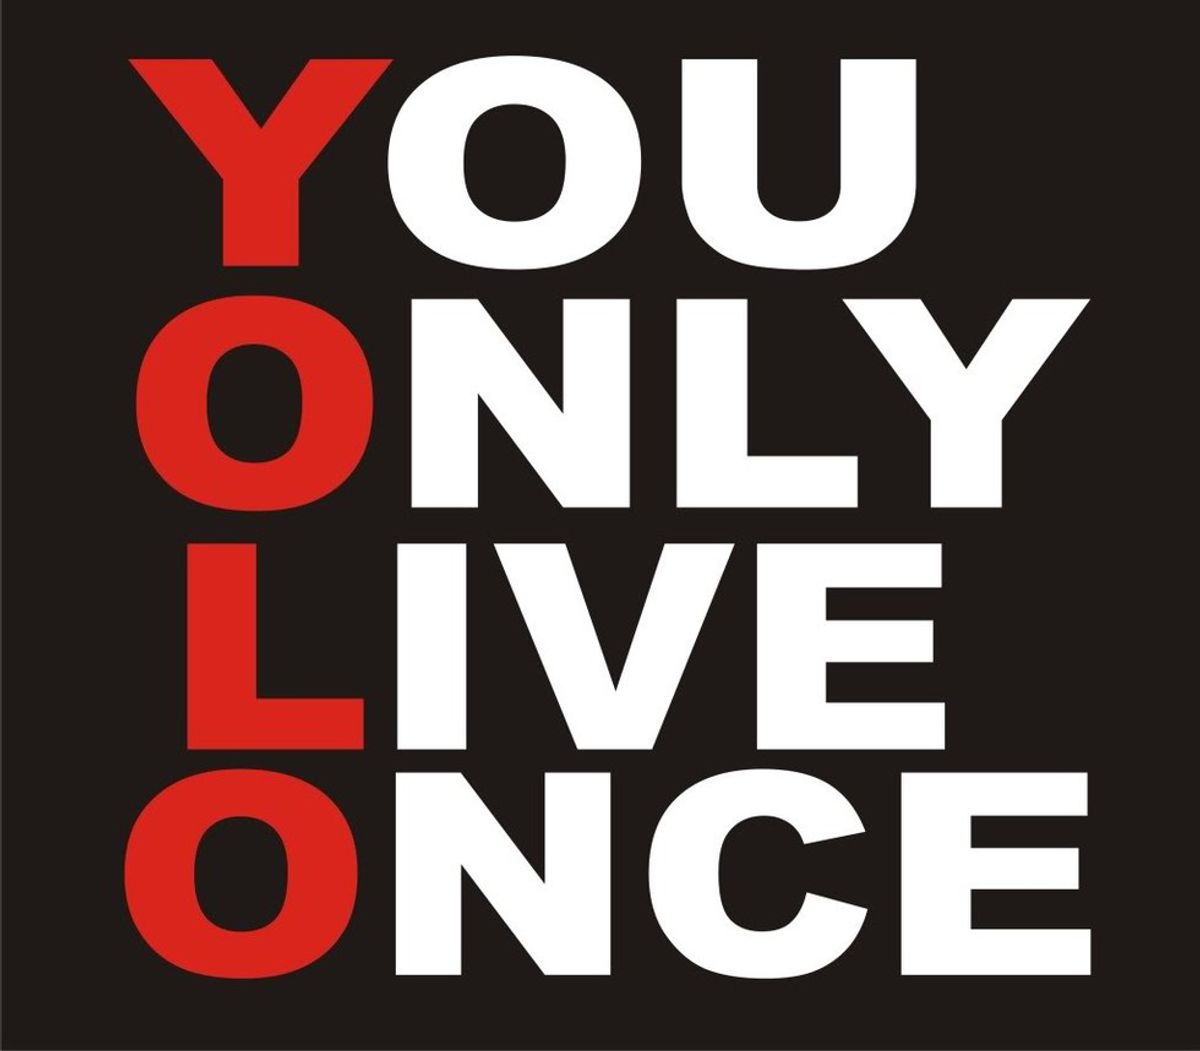 Why “YOLO” Should Be Taken As A Serious Philosophy